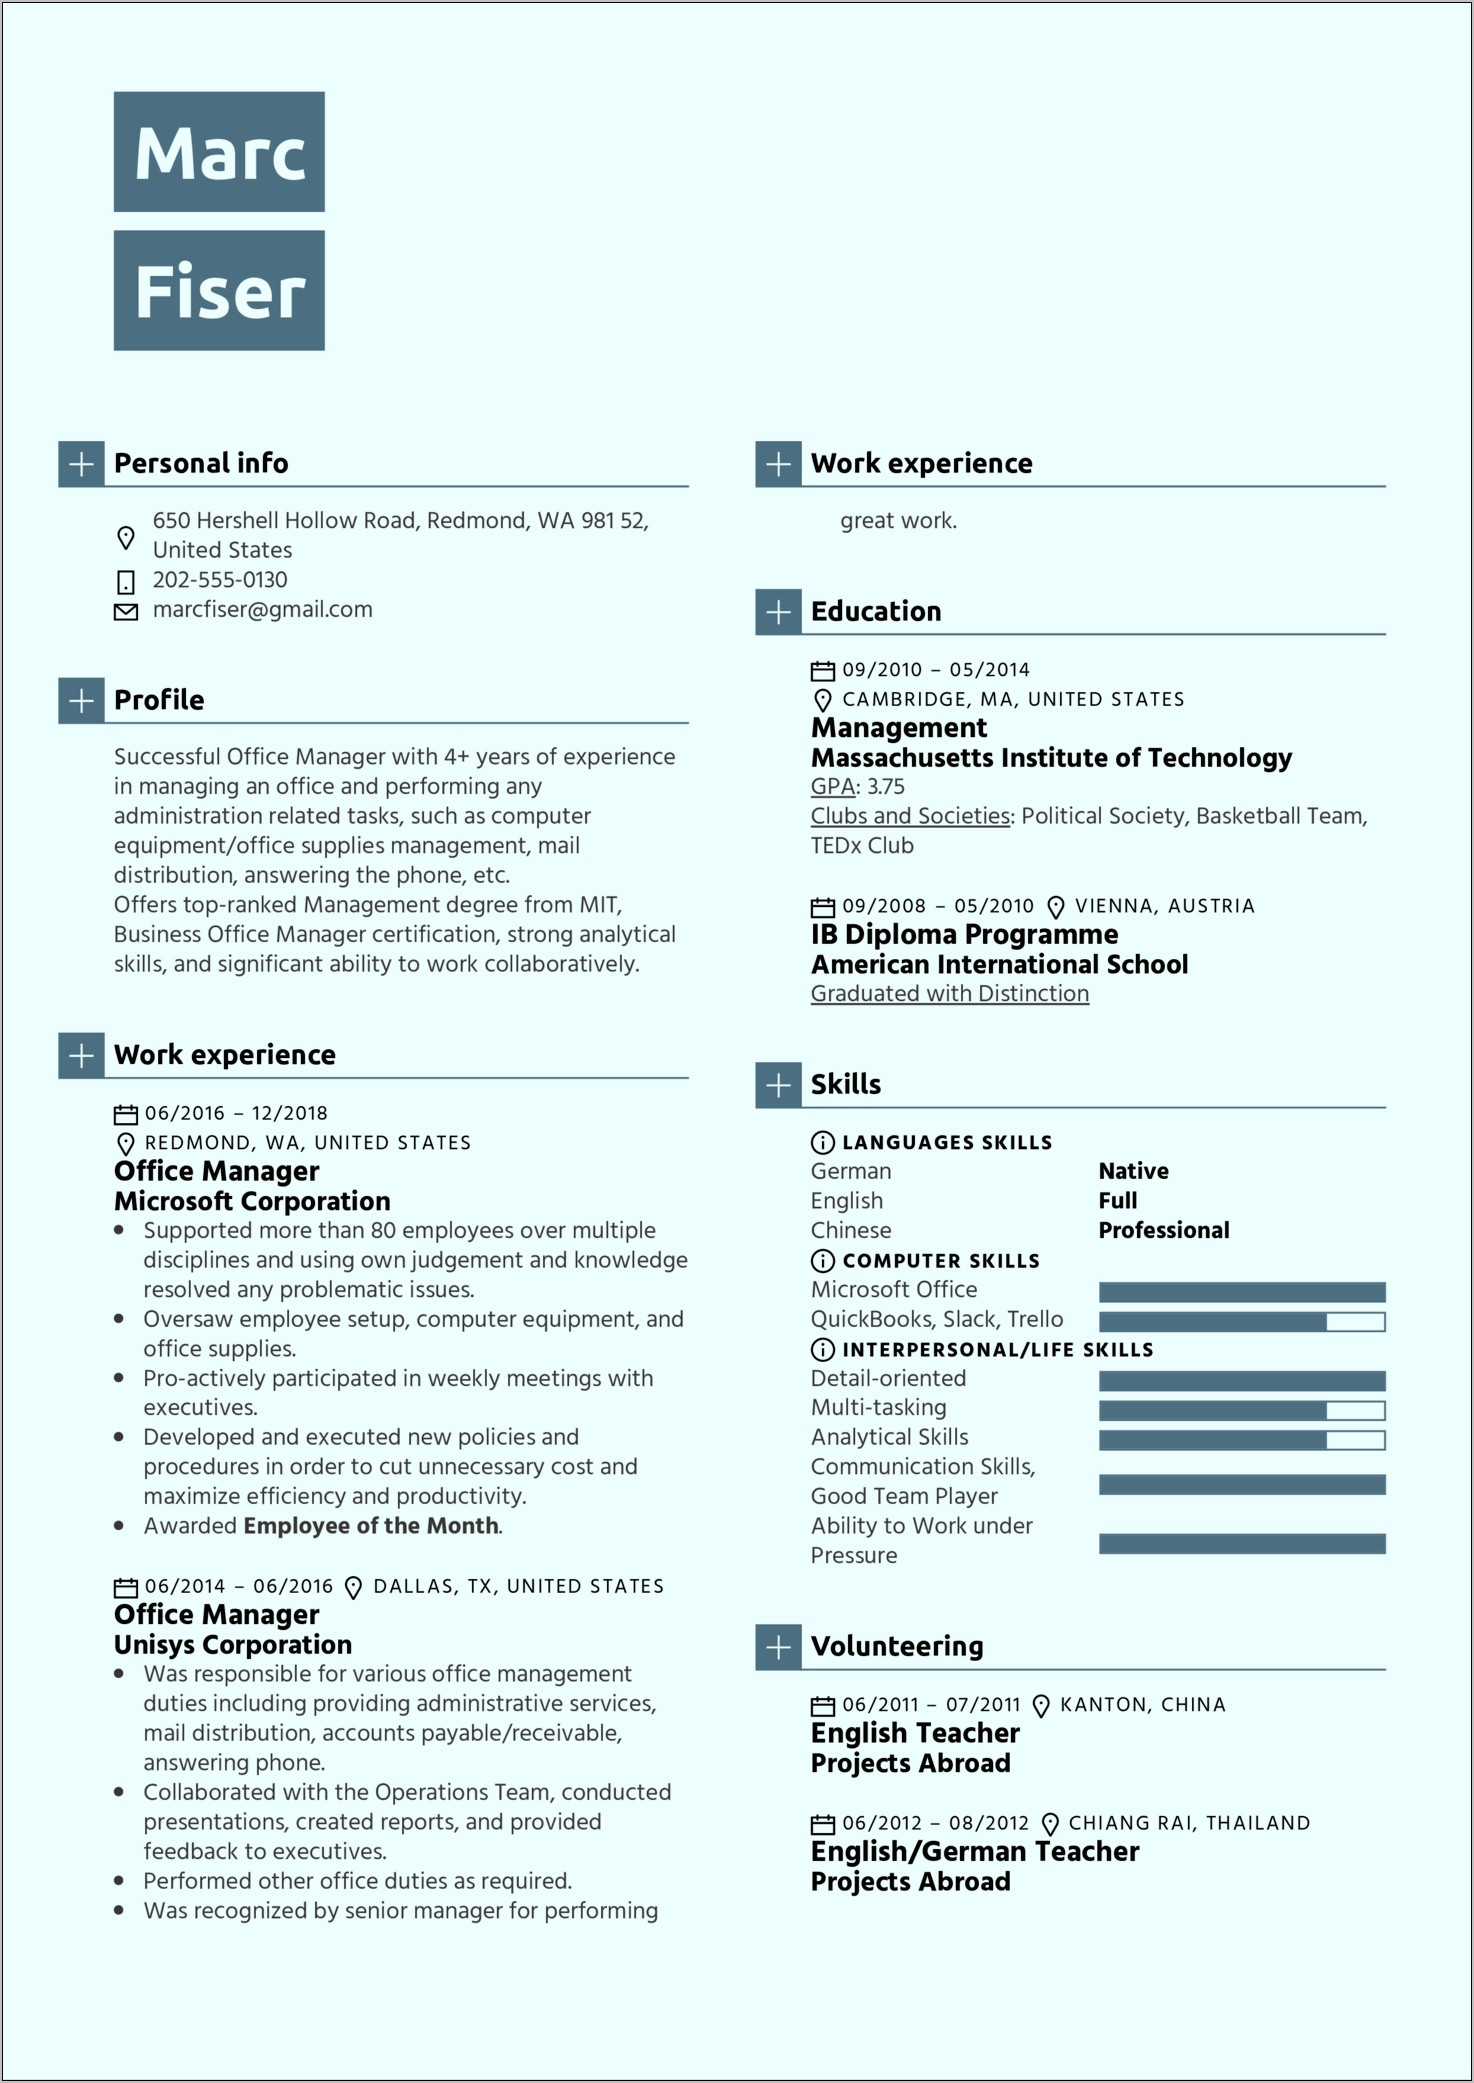 Resume Wording For Office Manager